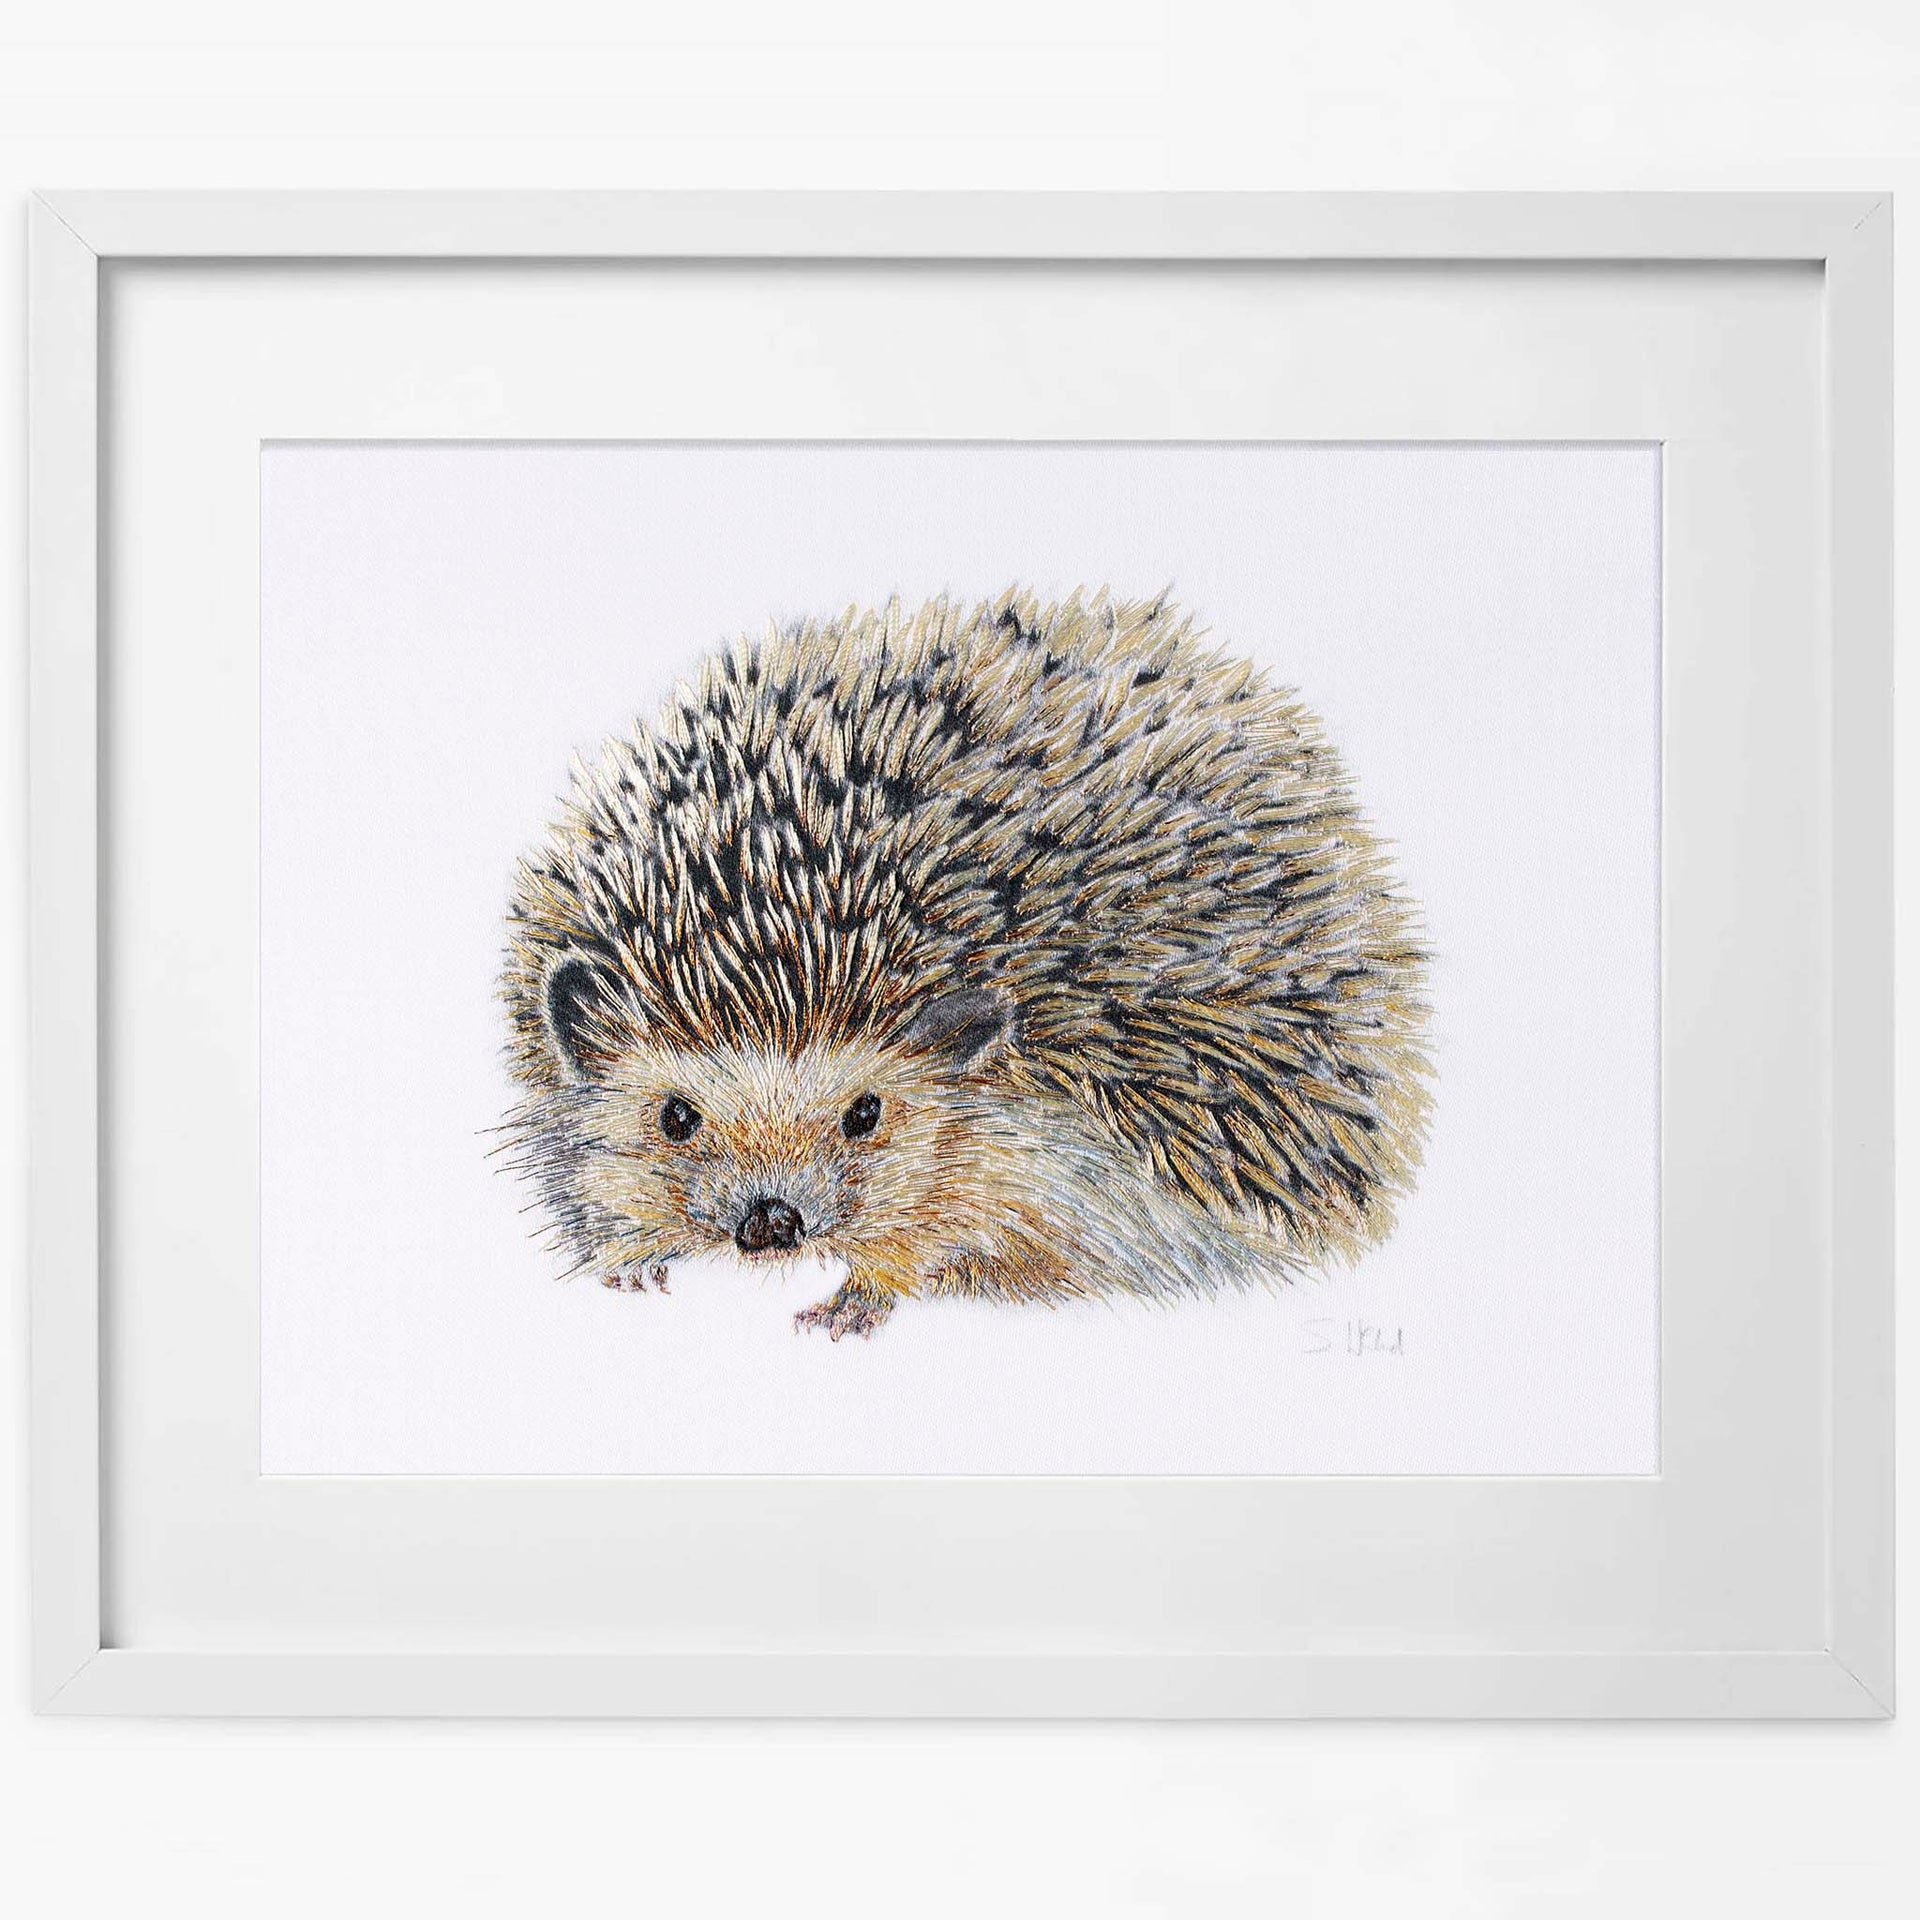 Hand embroidered hedgehog limited edition print in white frame